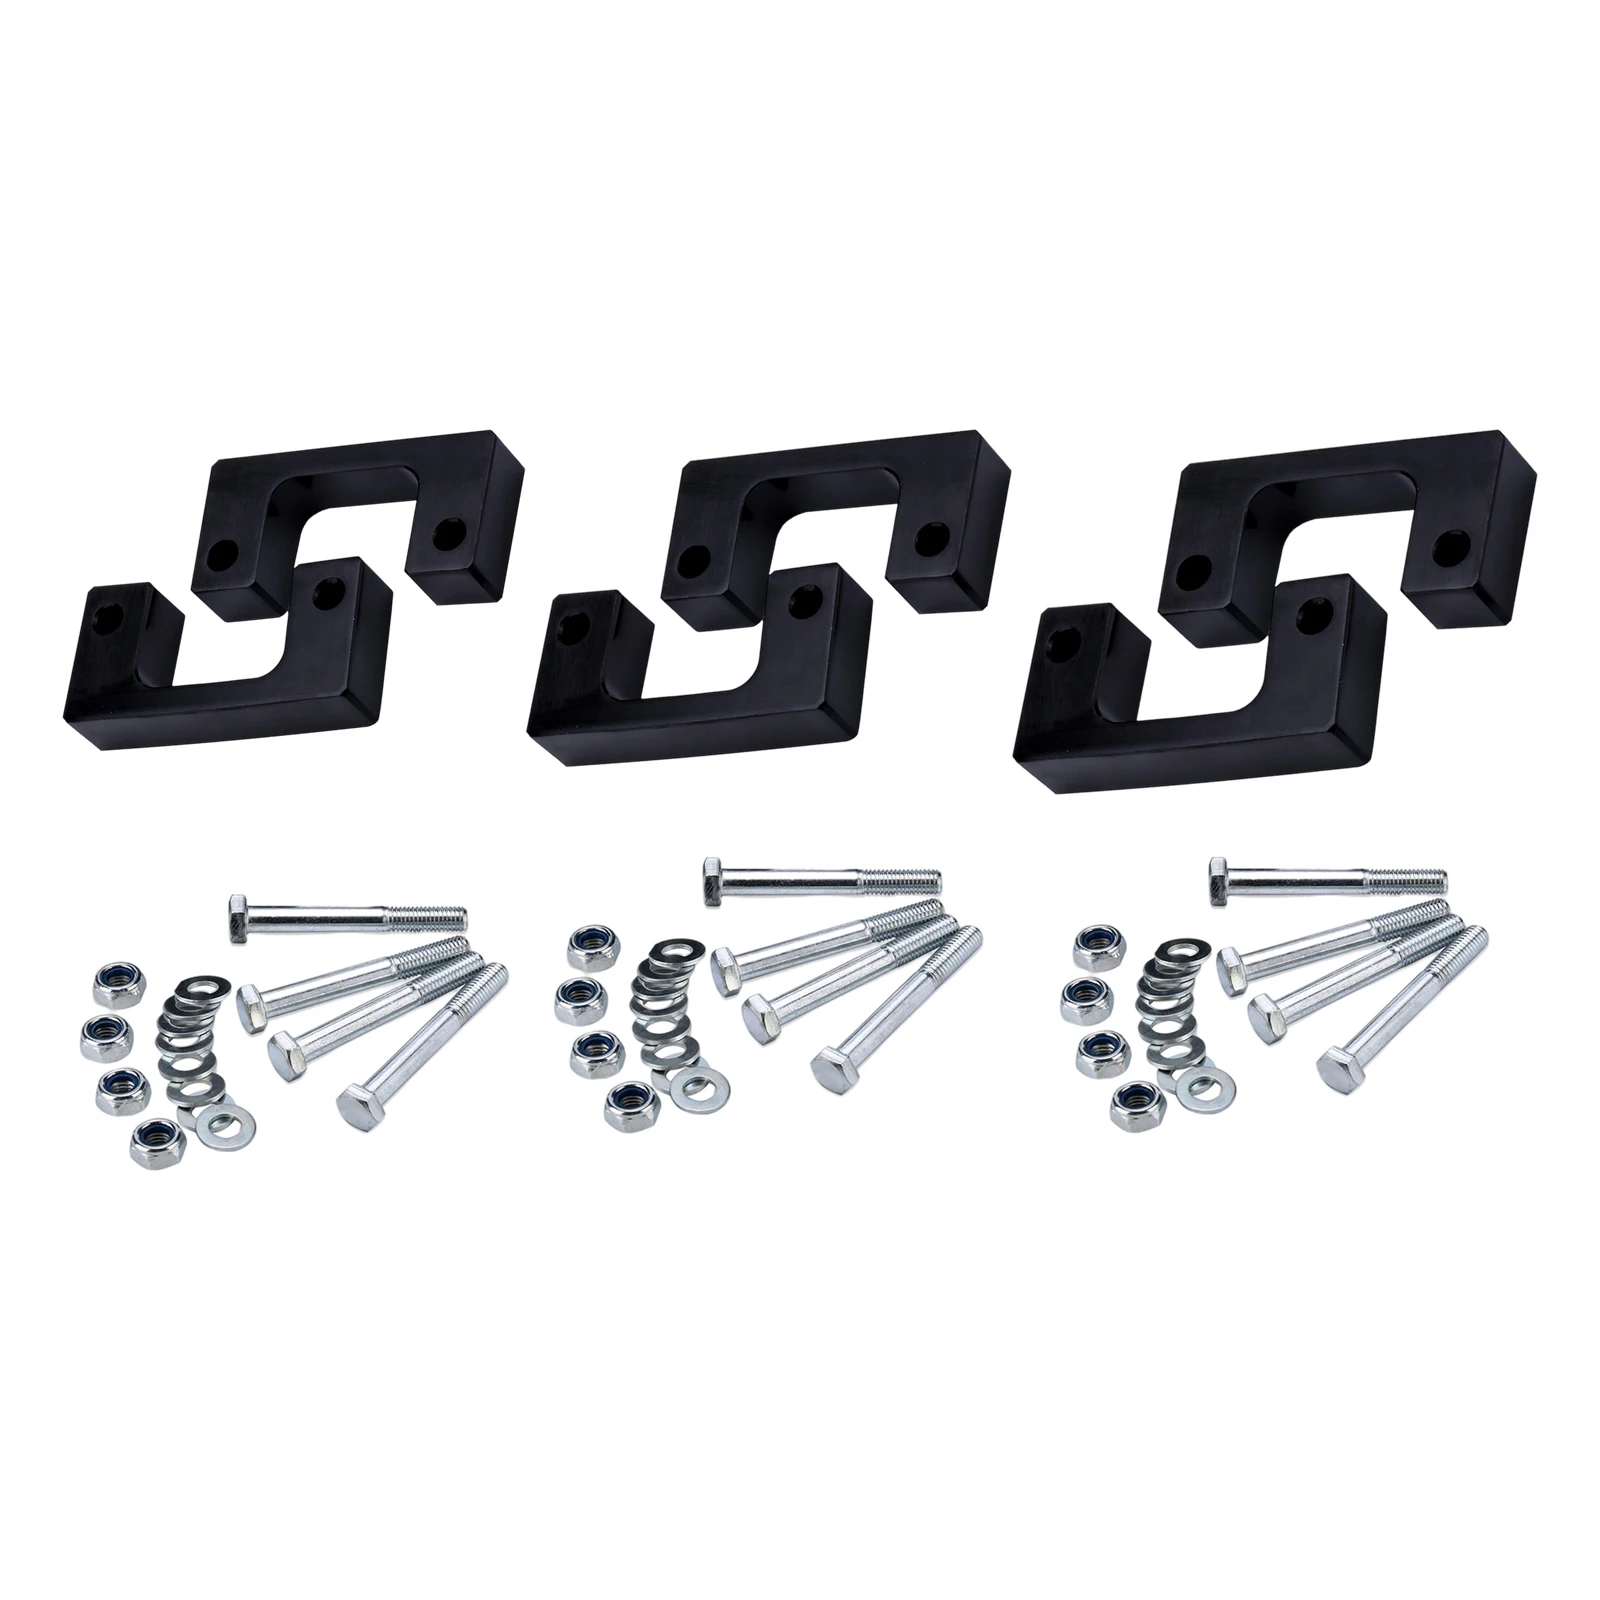 Front Leveling Lift Kit Replacing Parts Front Lift Spacers Fit for Chevy Silverado for GM 1500 for GMC Sierra 2007-2019